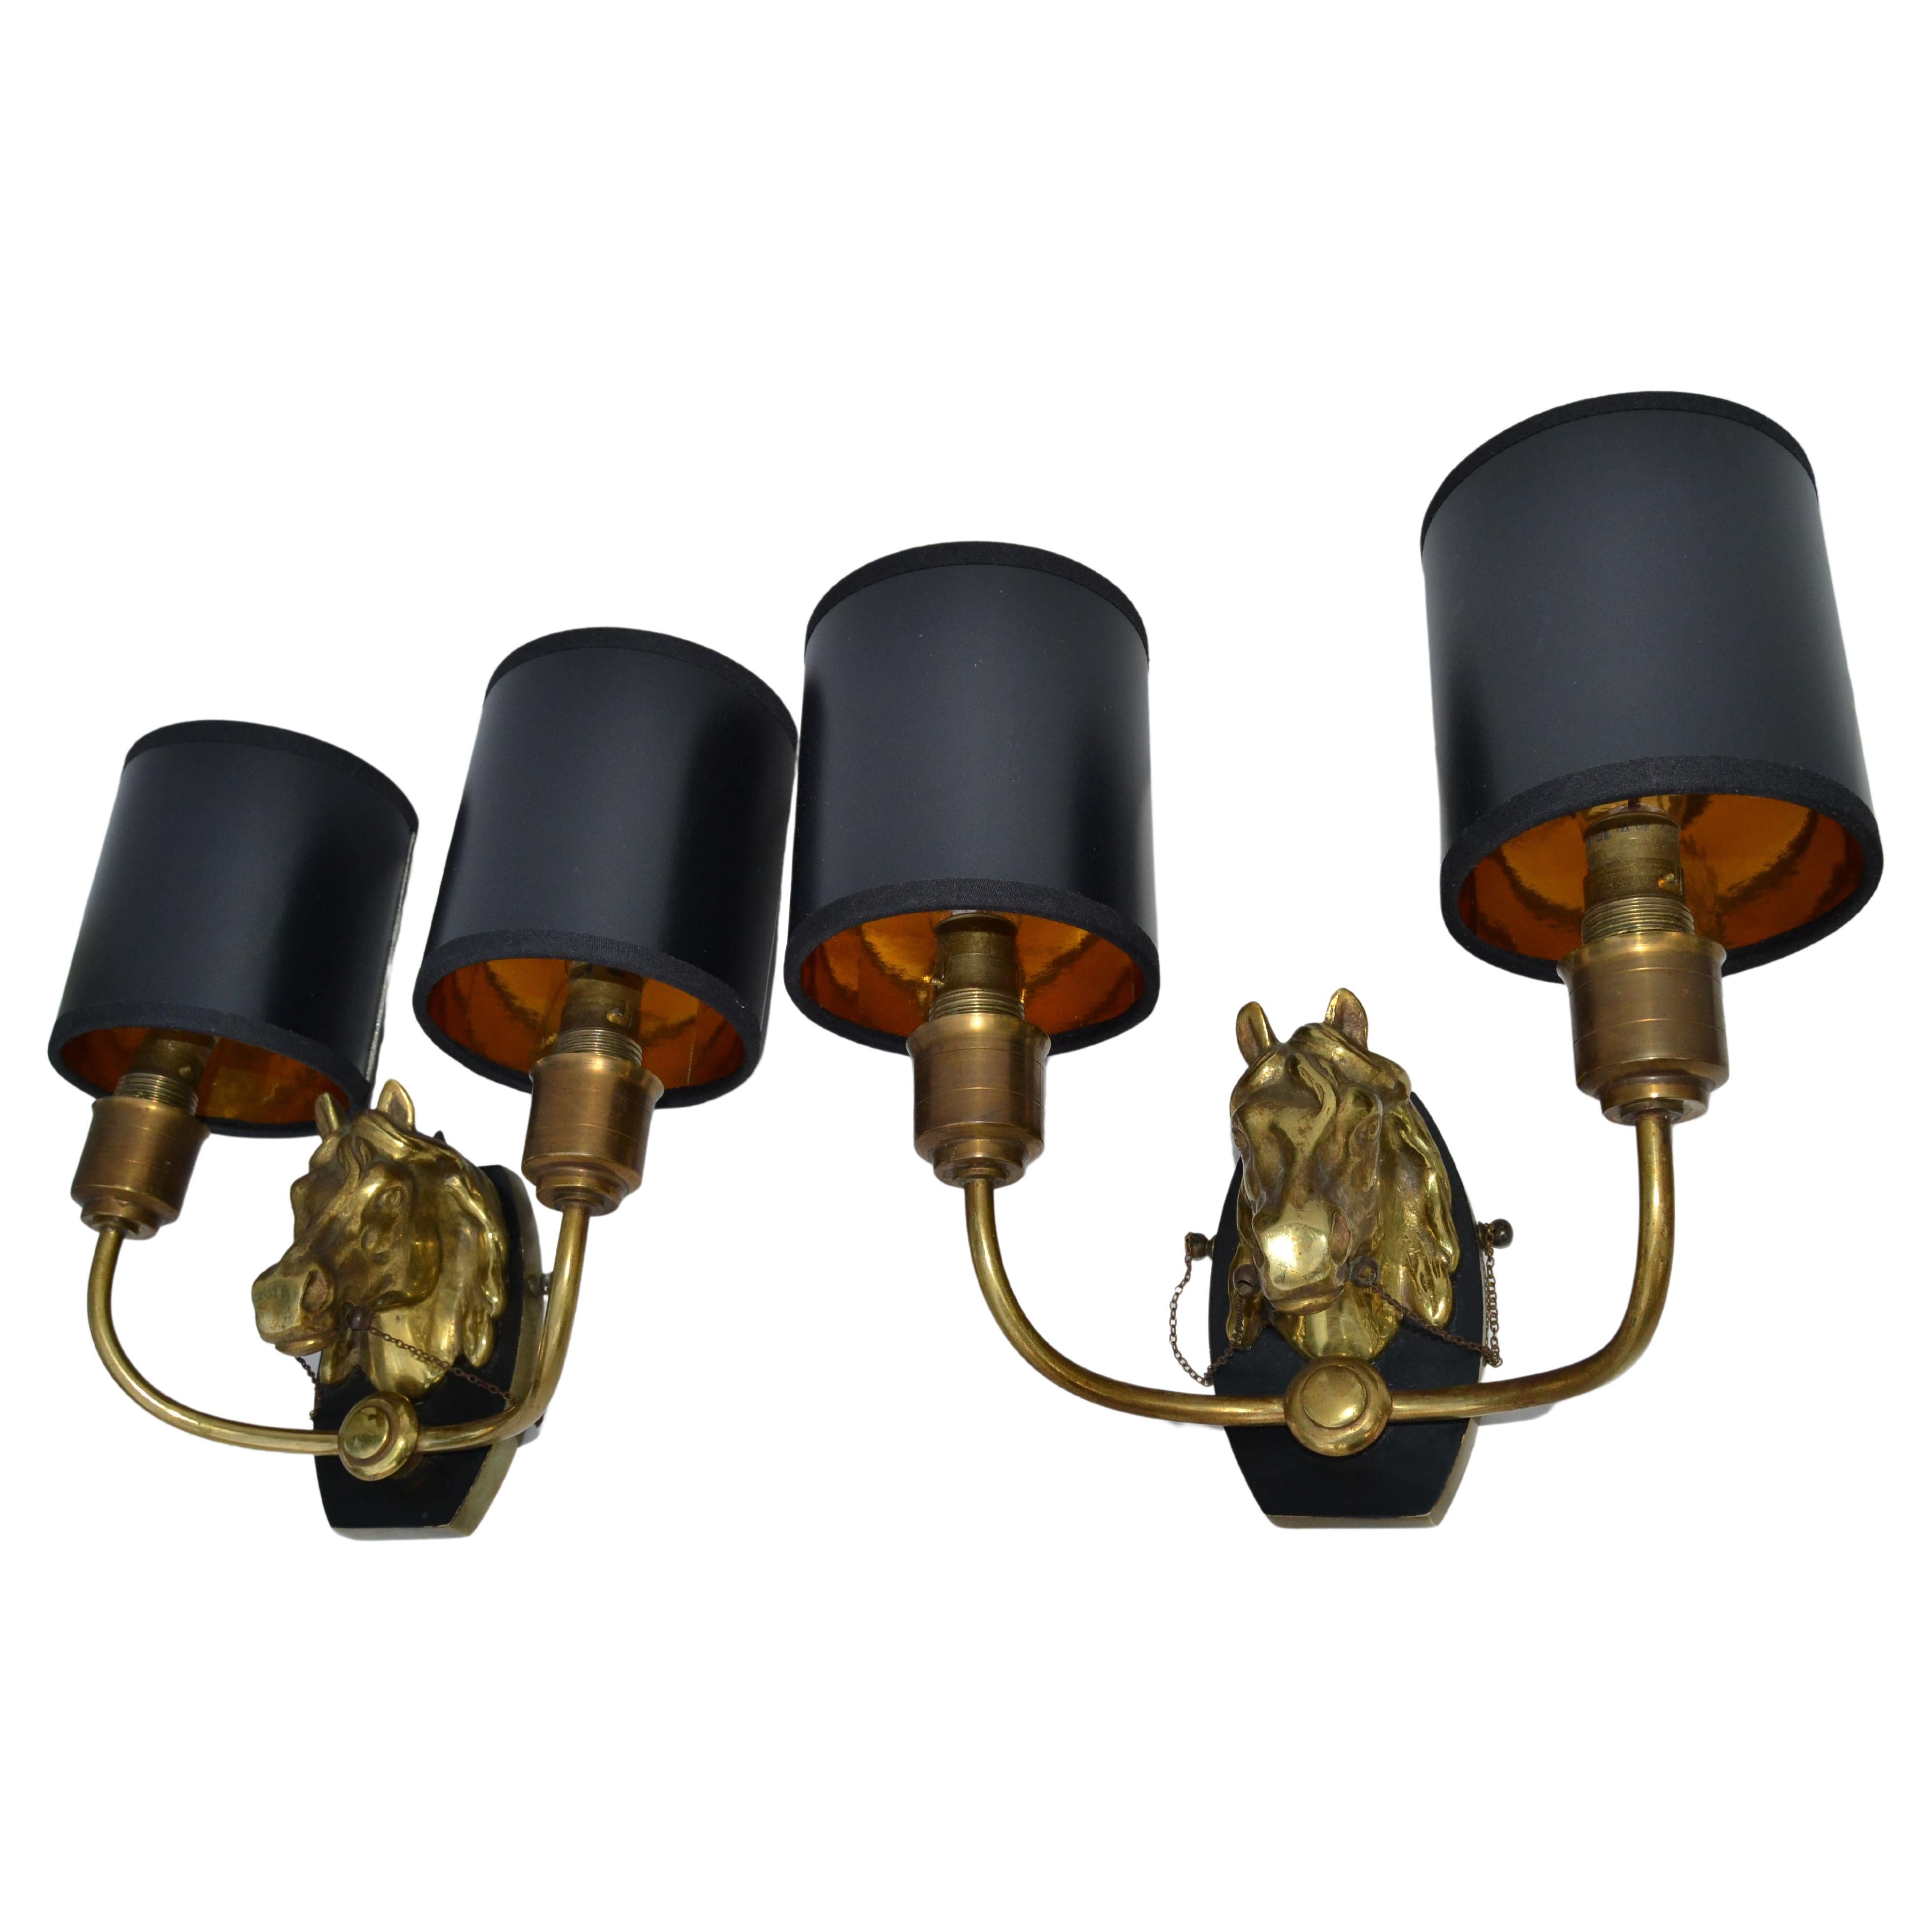 Superb pair of Maison Baguès Horse sconces, Wall lights in 2 patina bronze.
2 Lights, 40 watts max bulb per light 
In working condition and each Sconce takes 2, 60 watts Candelabra or LED Bulbs.
Custom back-plate available.
Measures: back-plate: